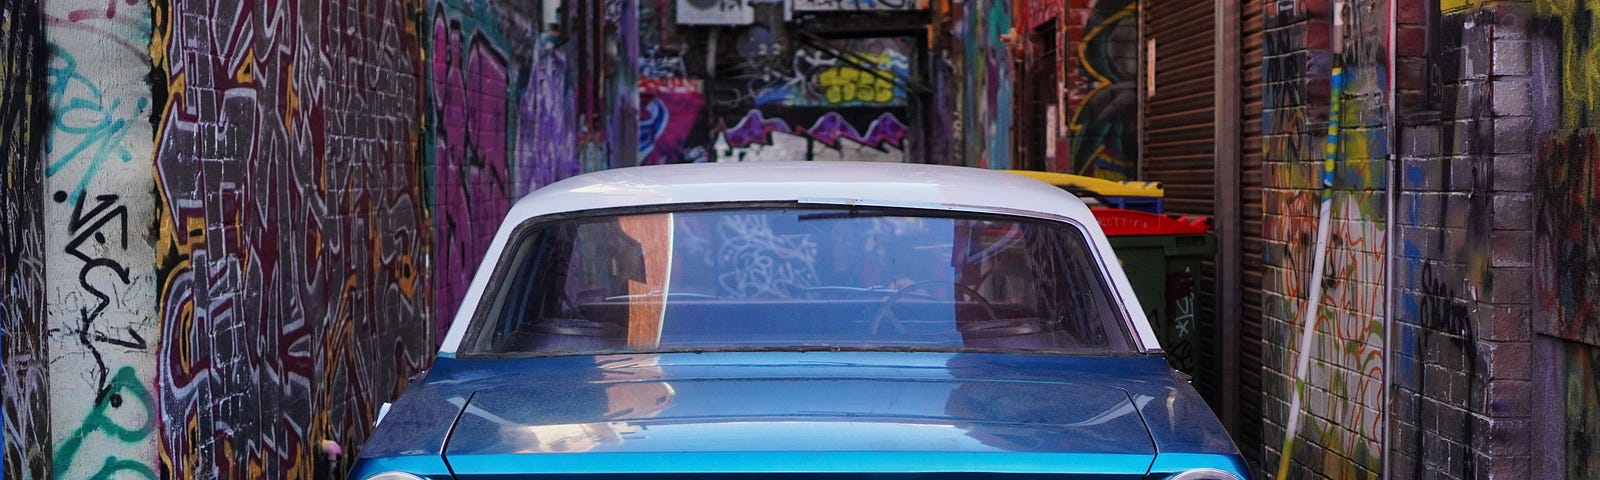 An old blue car in a garage decorated with graffiti